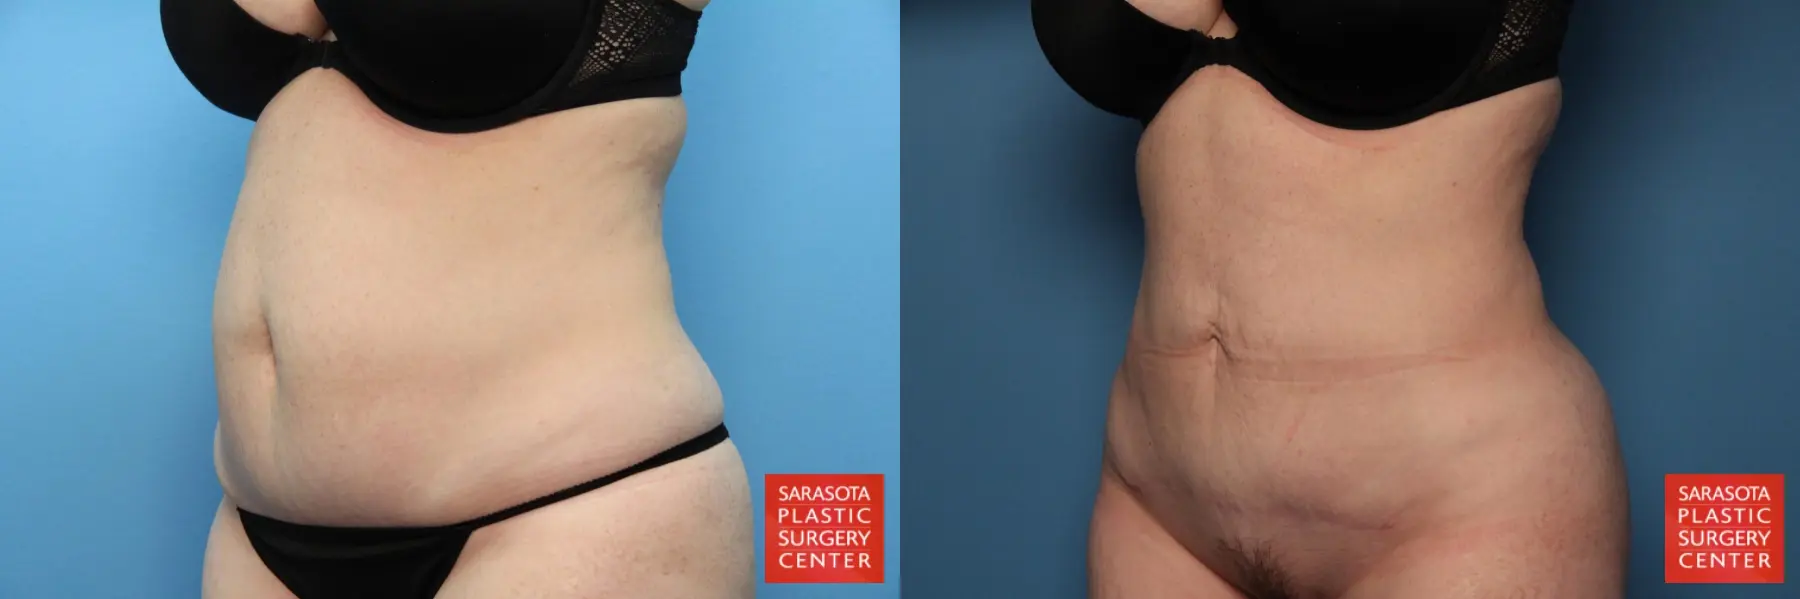 Liposuction: Patient 3 - Before and After 2